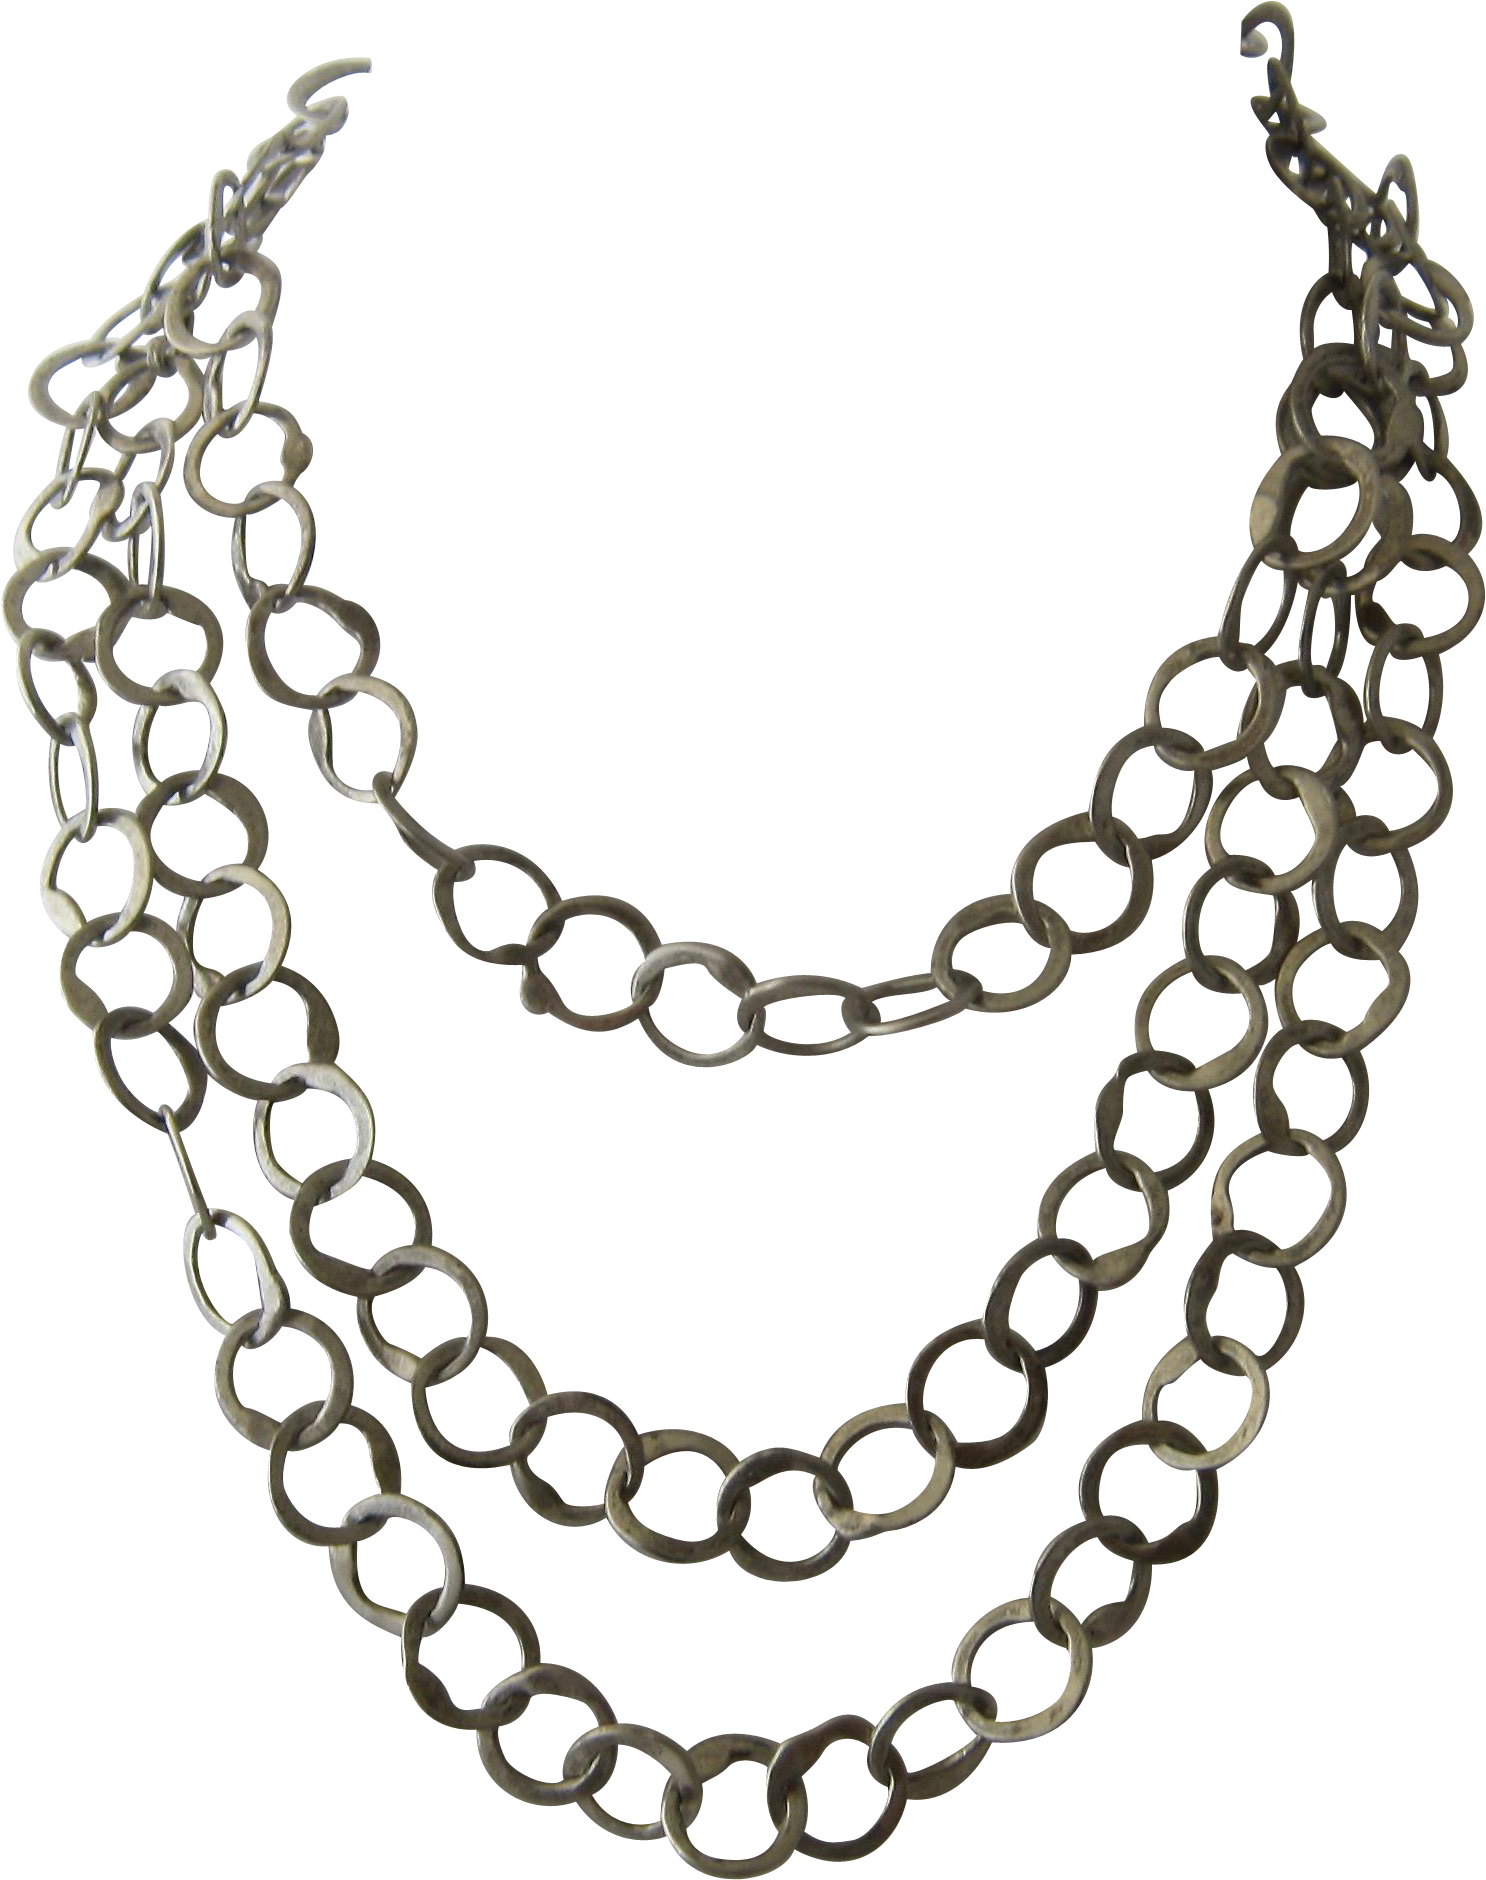 1879 X 1879 3 - Silver Chain Necklace Transparent Png Clipart (1879x1879), Png Download